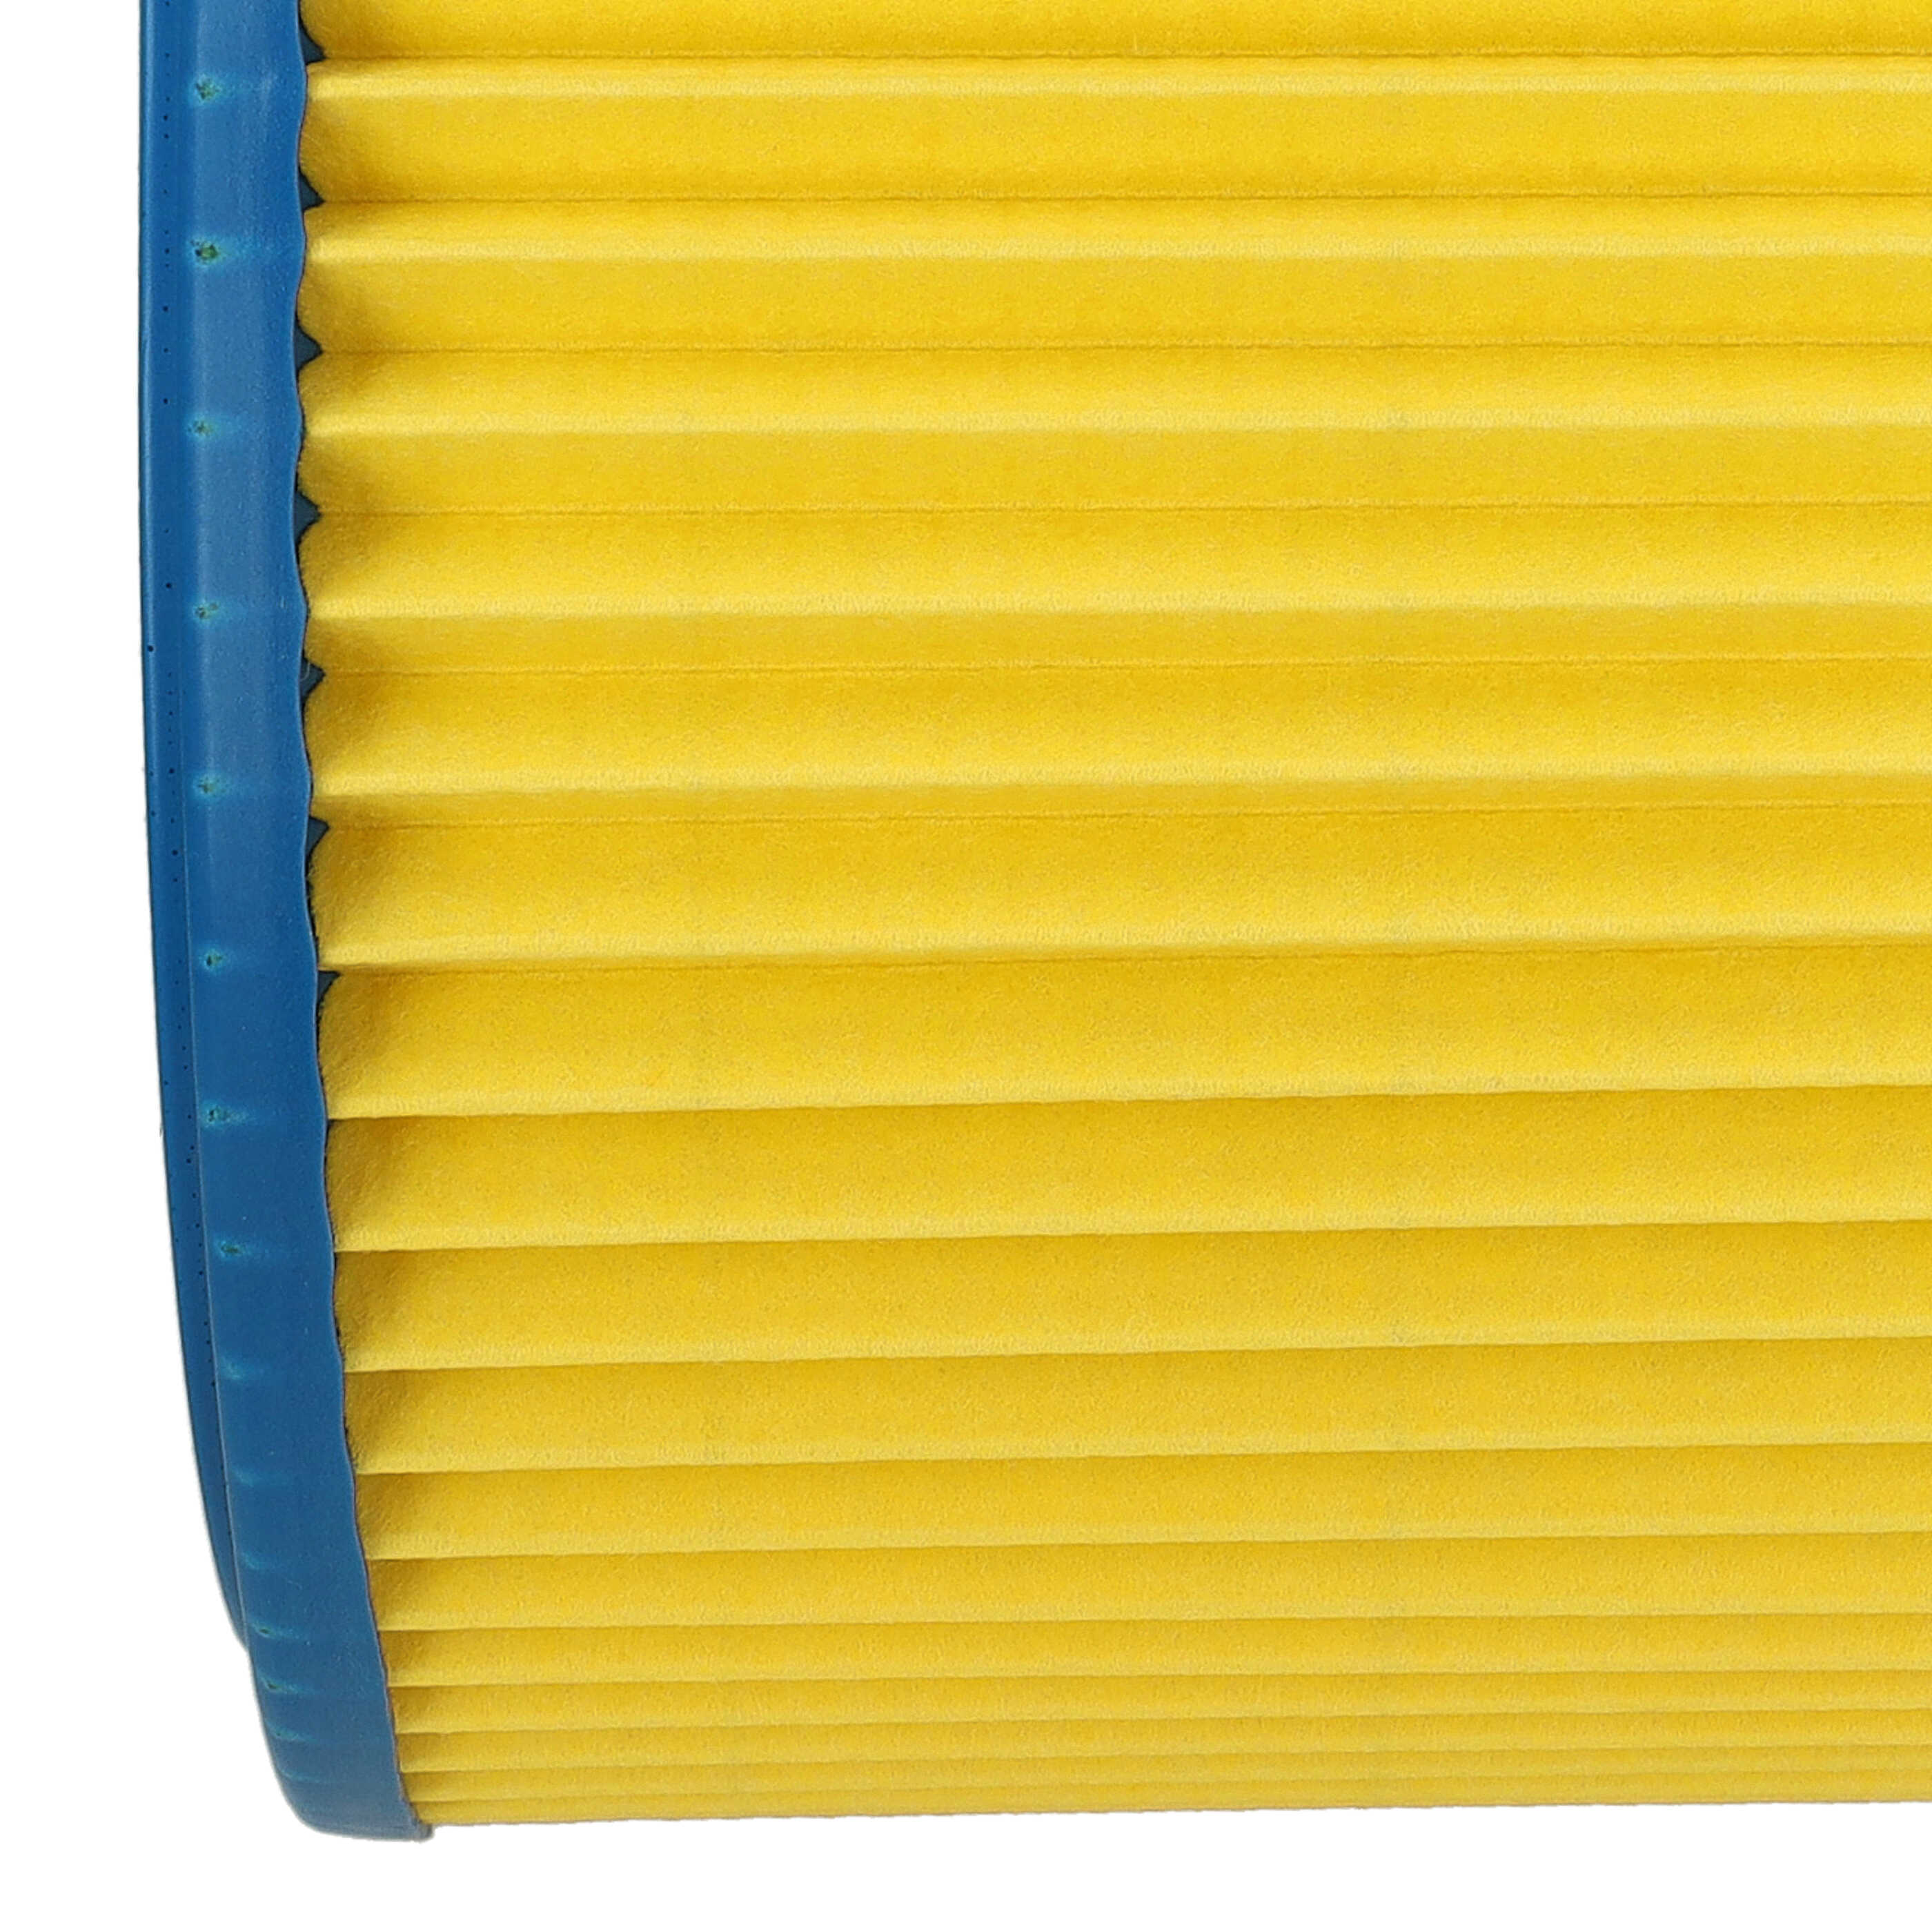 1x cartridge filter replaces Einhell 2351110 for ThomasVacuum Cleaner, blue / yellow